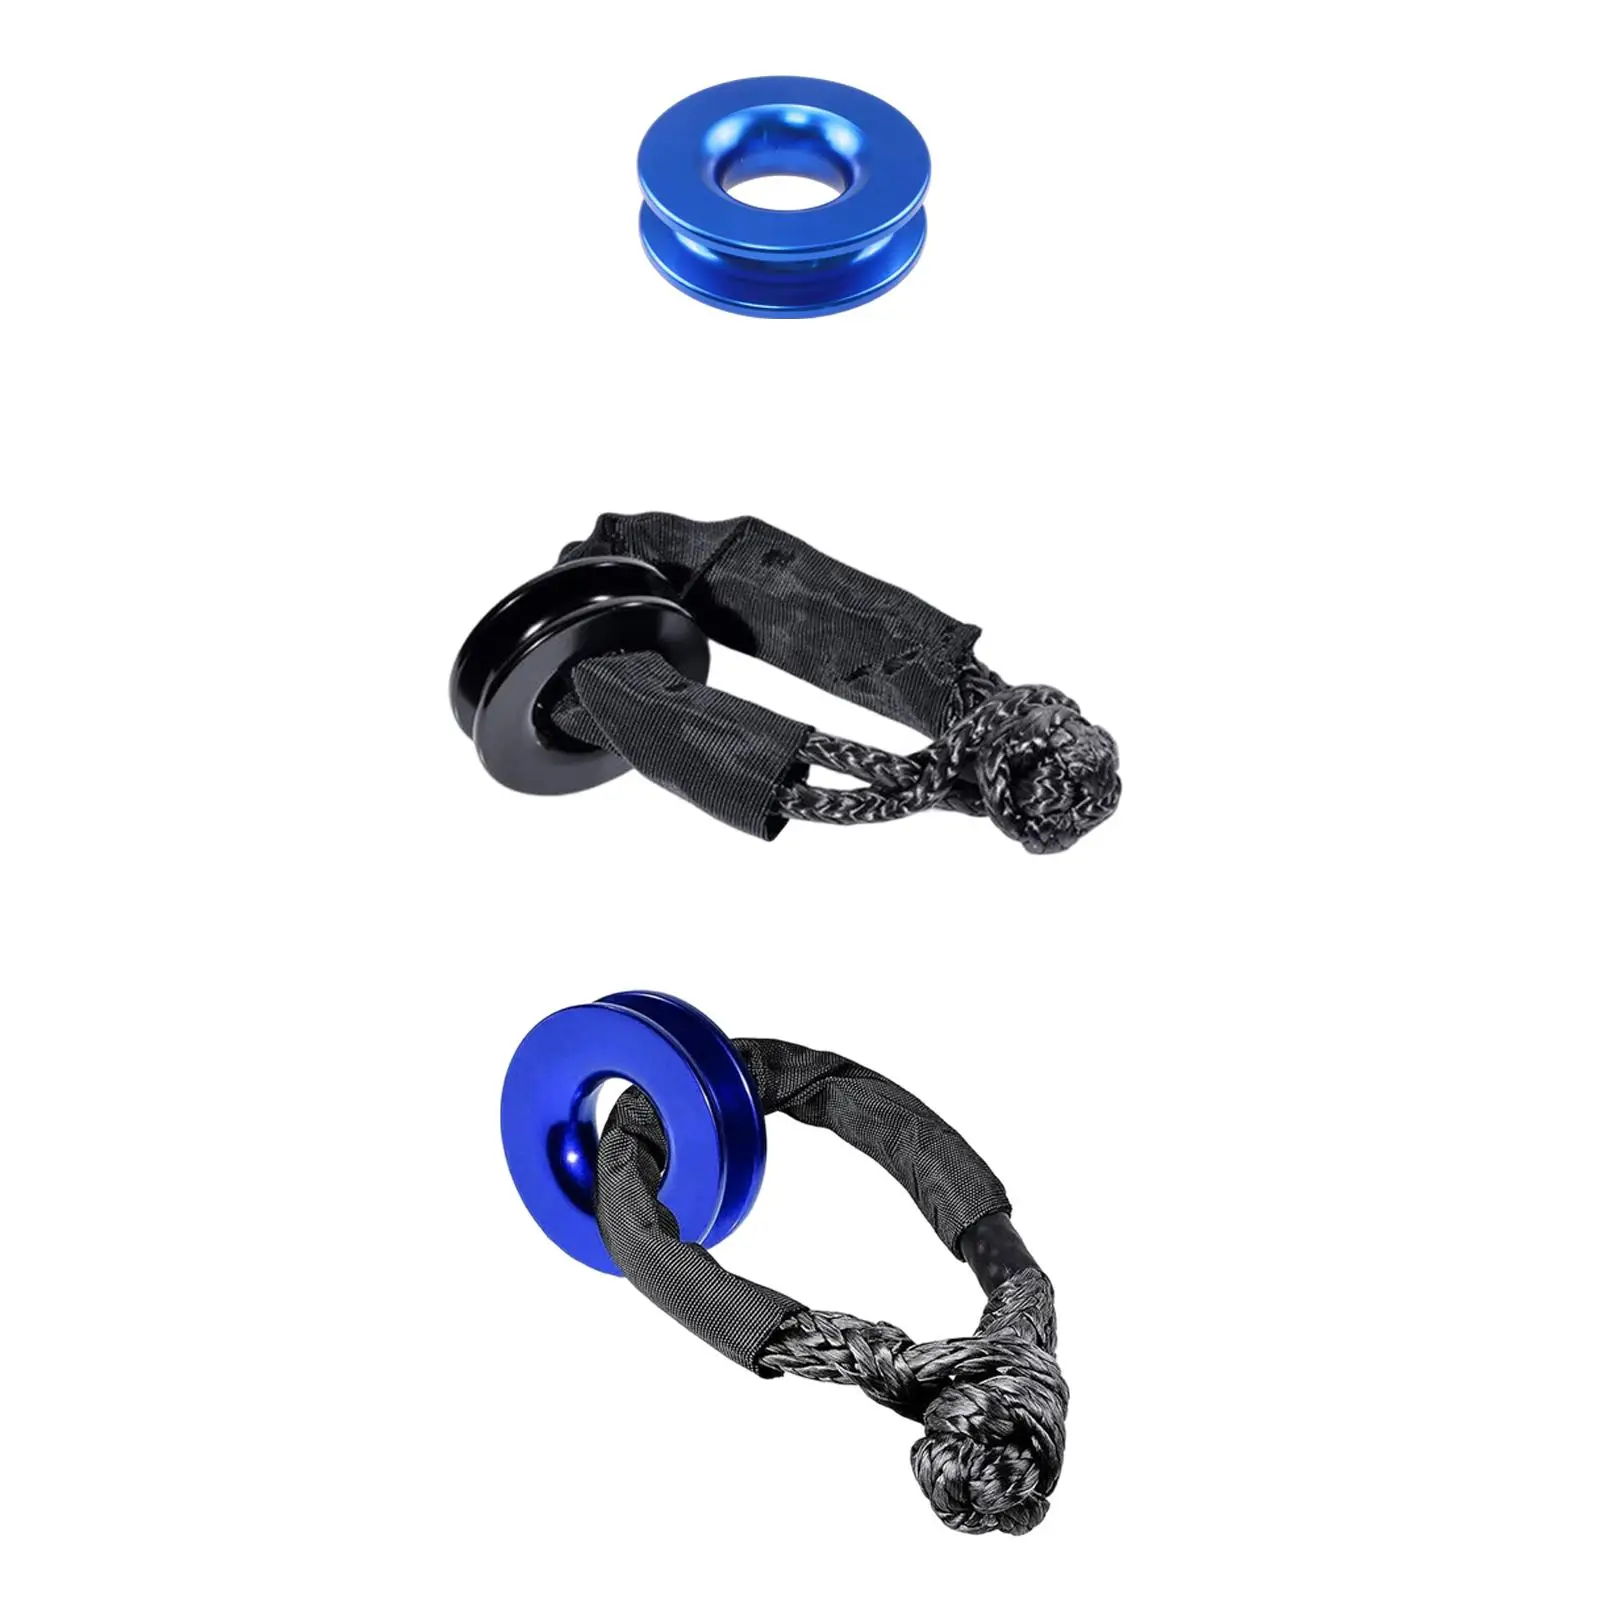 Recovery Durable Easy to Install for Soft Shackle ATV UTV SUV